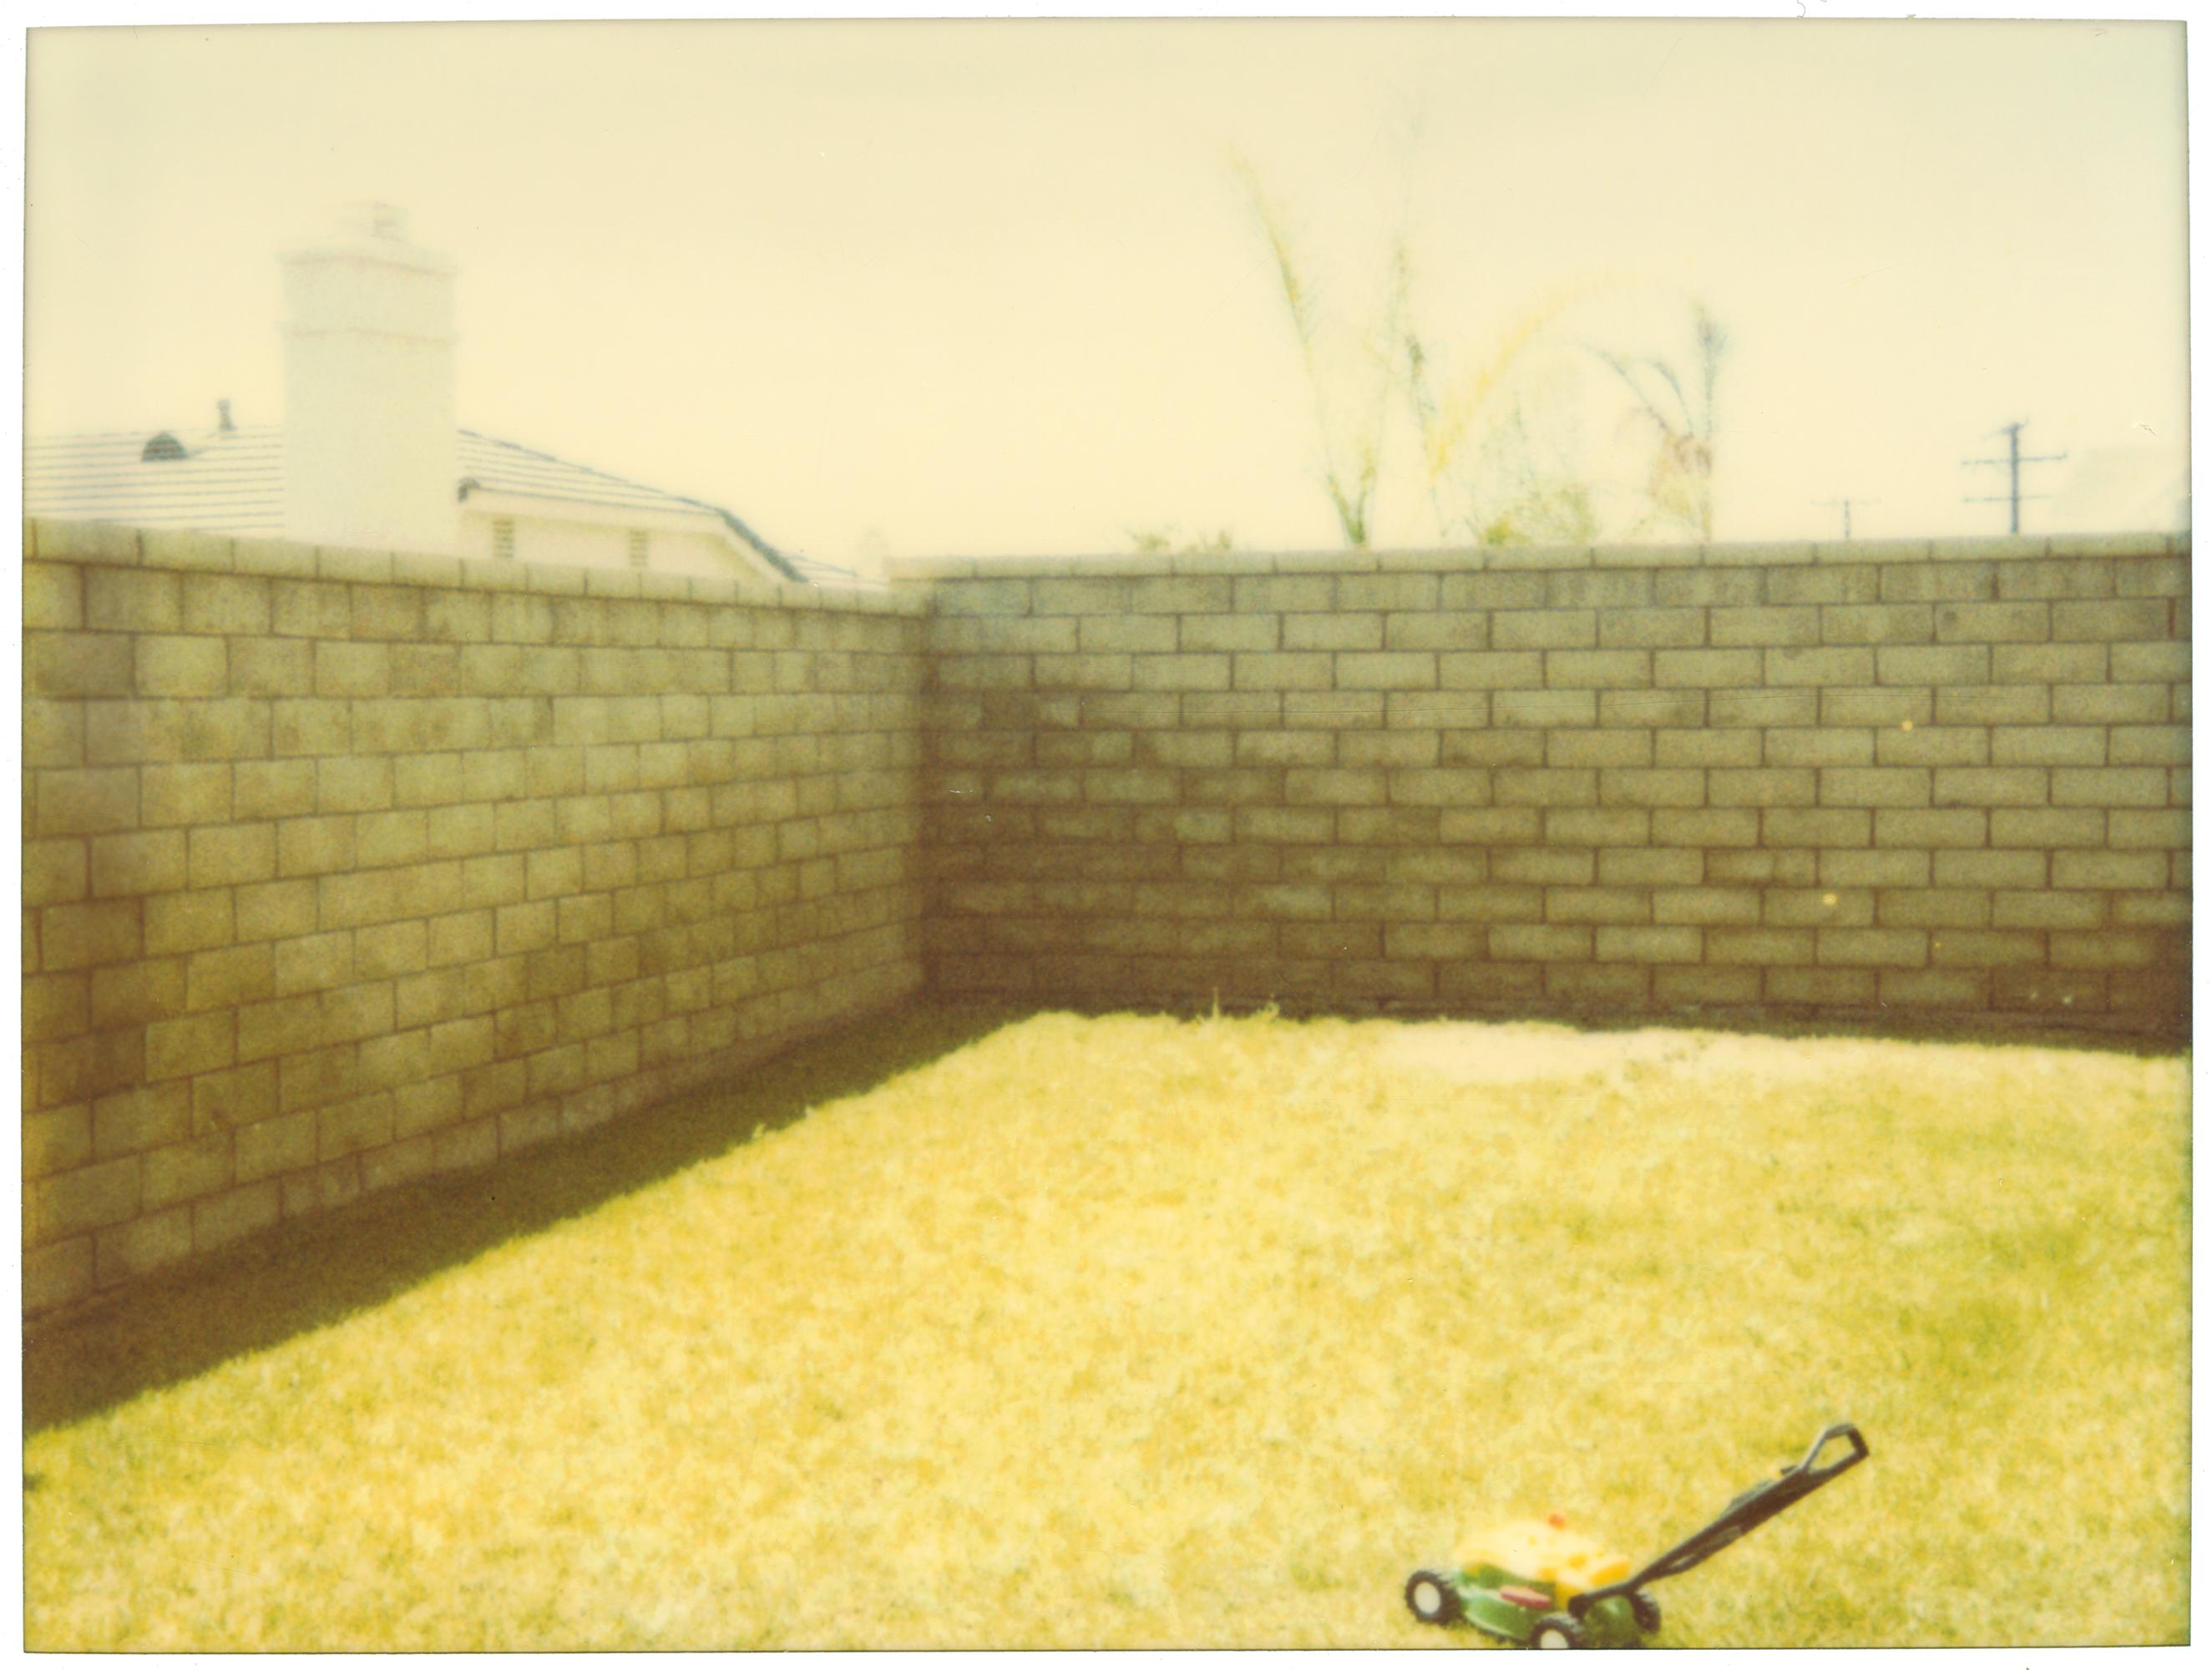 Suburbia (Suburbia) 2004, 

60x80cm each, 200x170cm installed.
Edition of 1/5, 
analog C-Print, hand-printed by the artist on Fuji Crystal Archive Paper, matte surface, based on a Polaroid, mounted on Aluminum with matte UV-Protection.
Signature